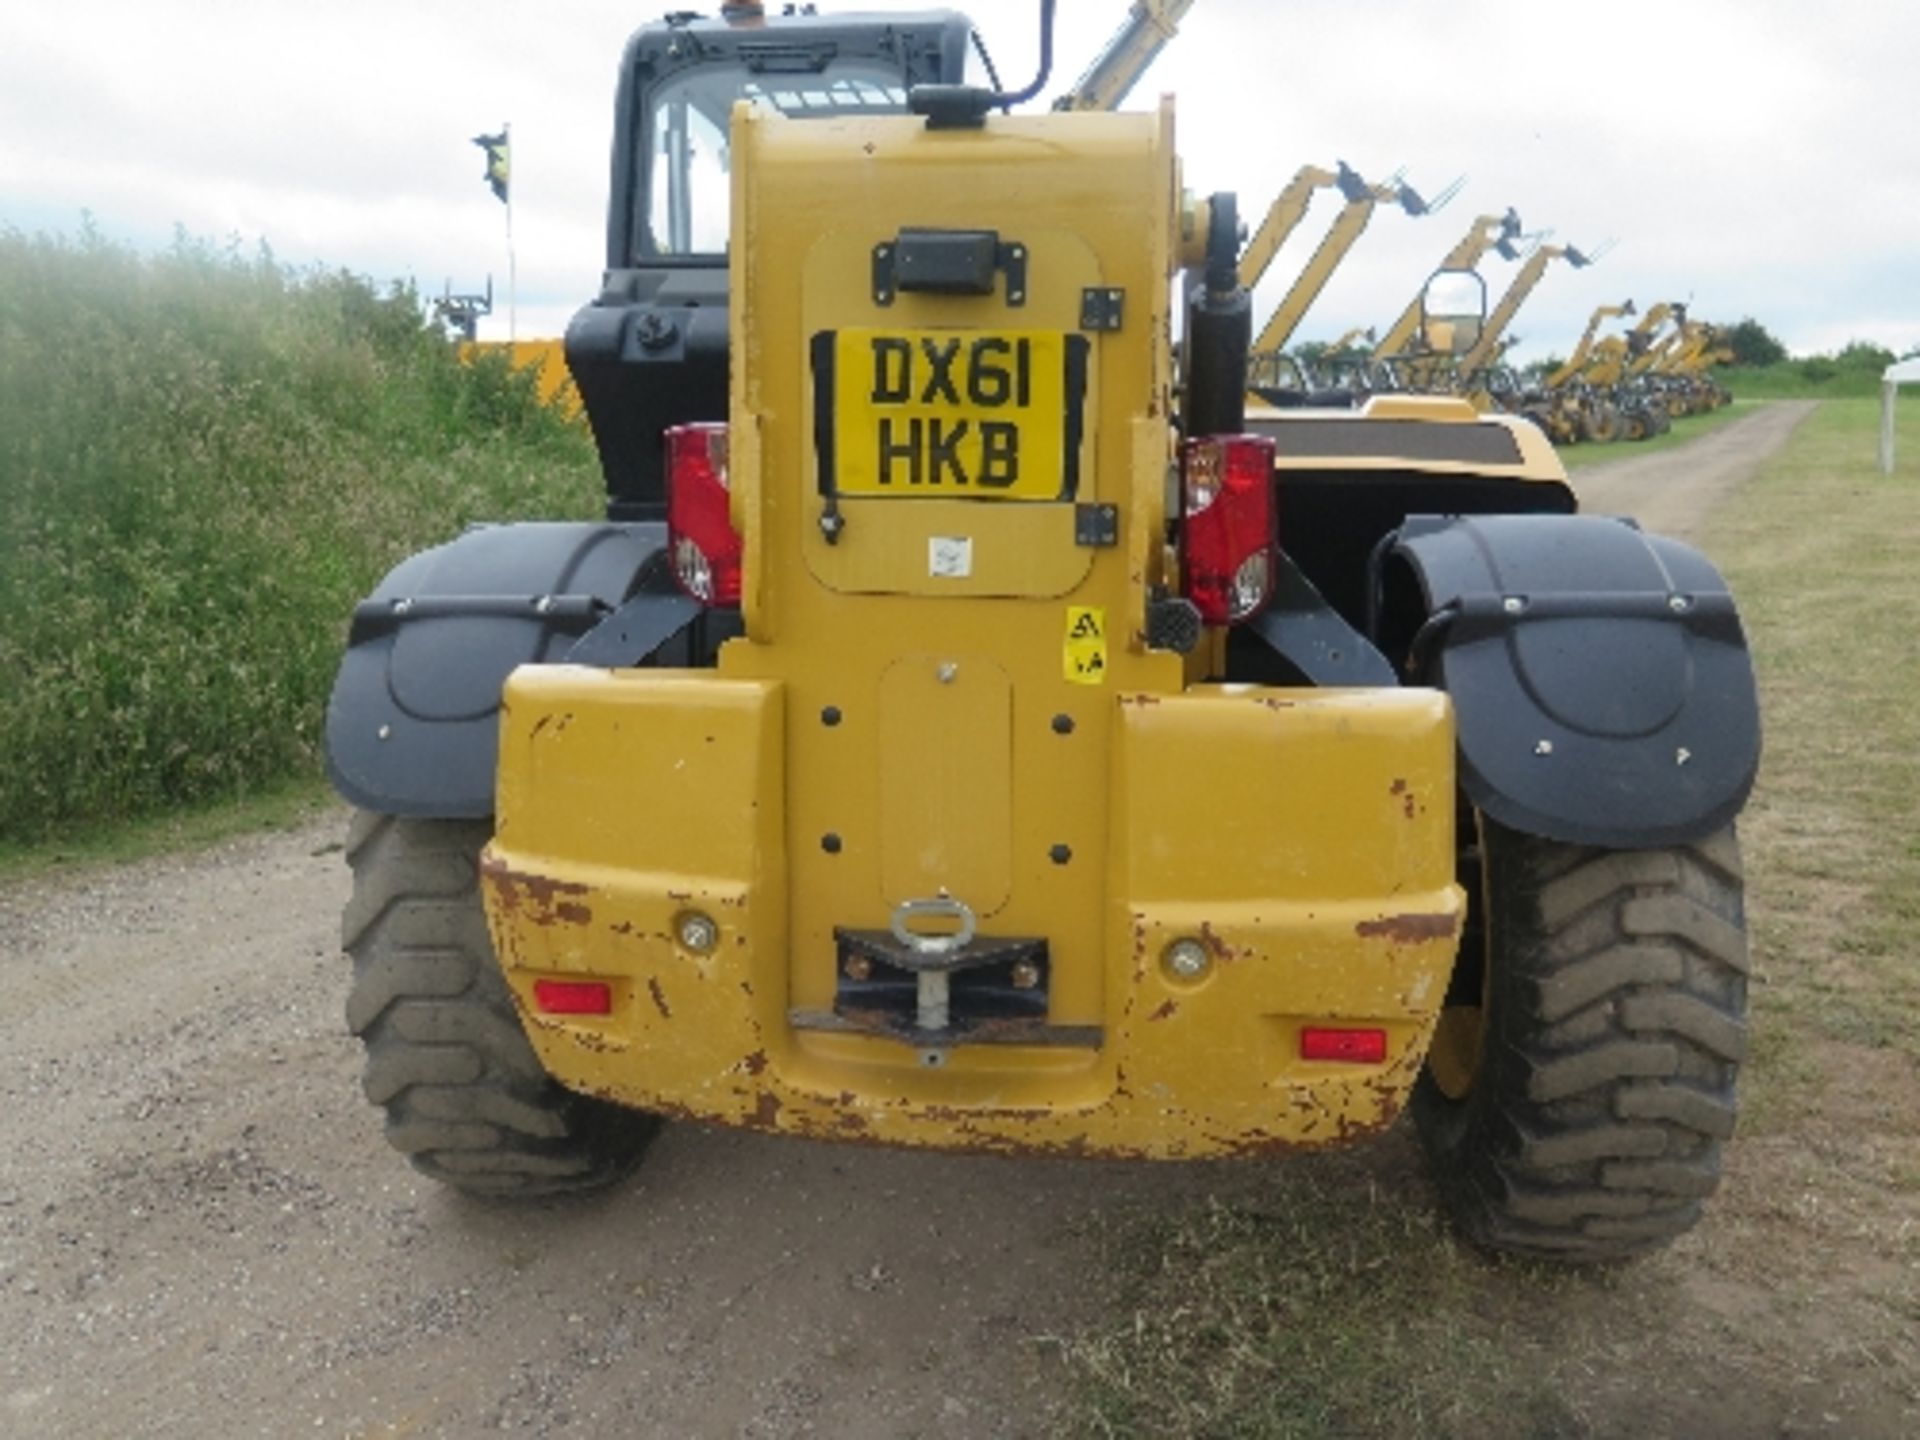 Caterpillar TH414STD telehandler 2680 hrs 2011 TBZ00712
This lot is included by kind permission - Image 3 of 7